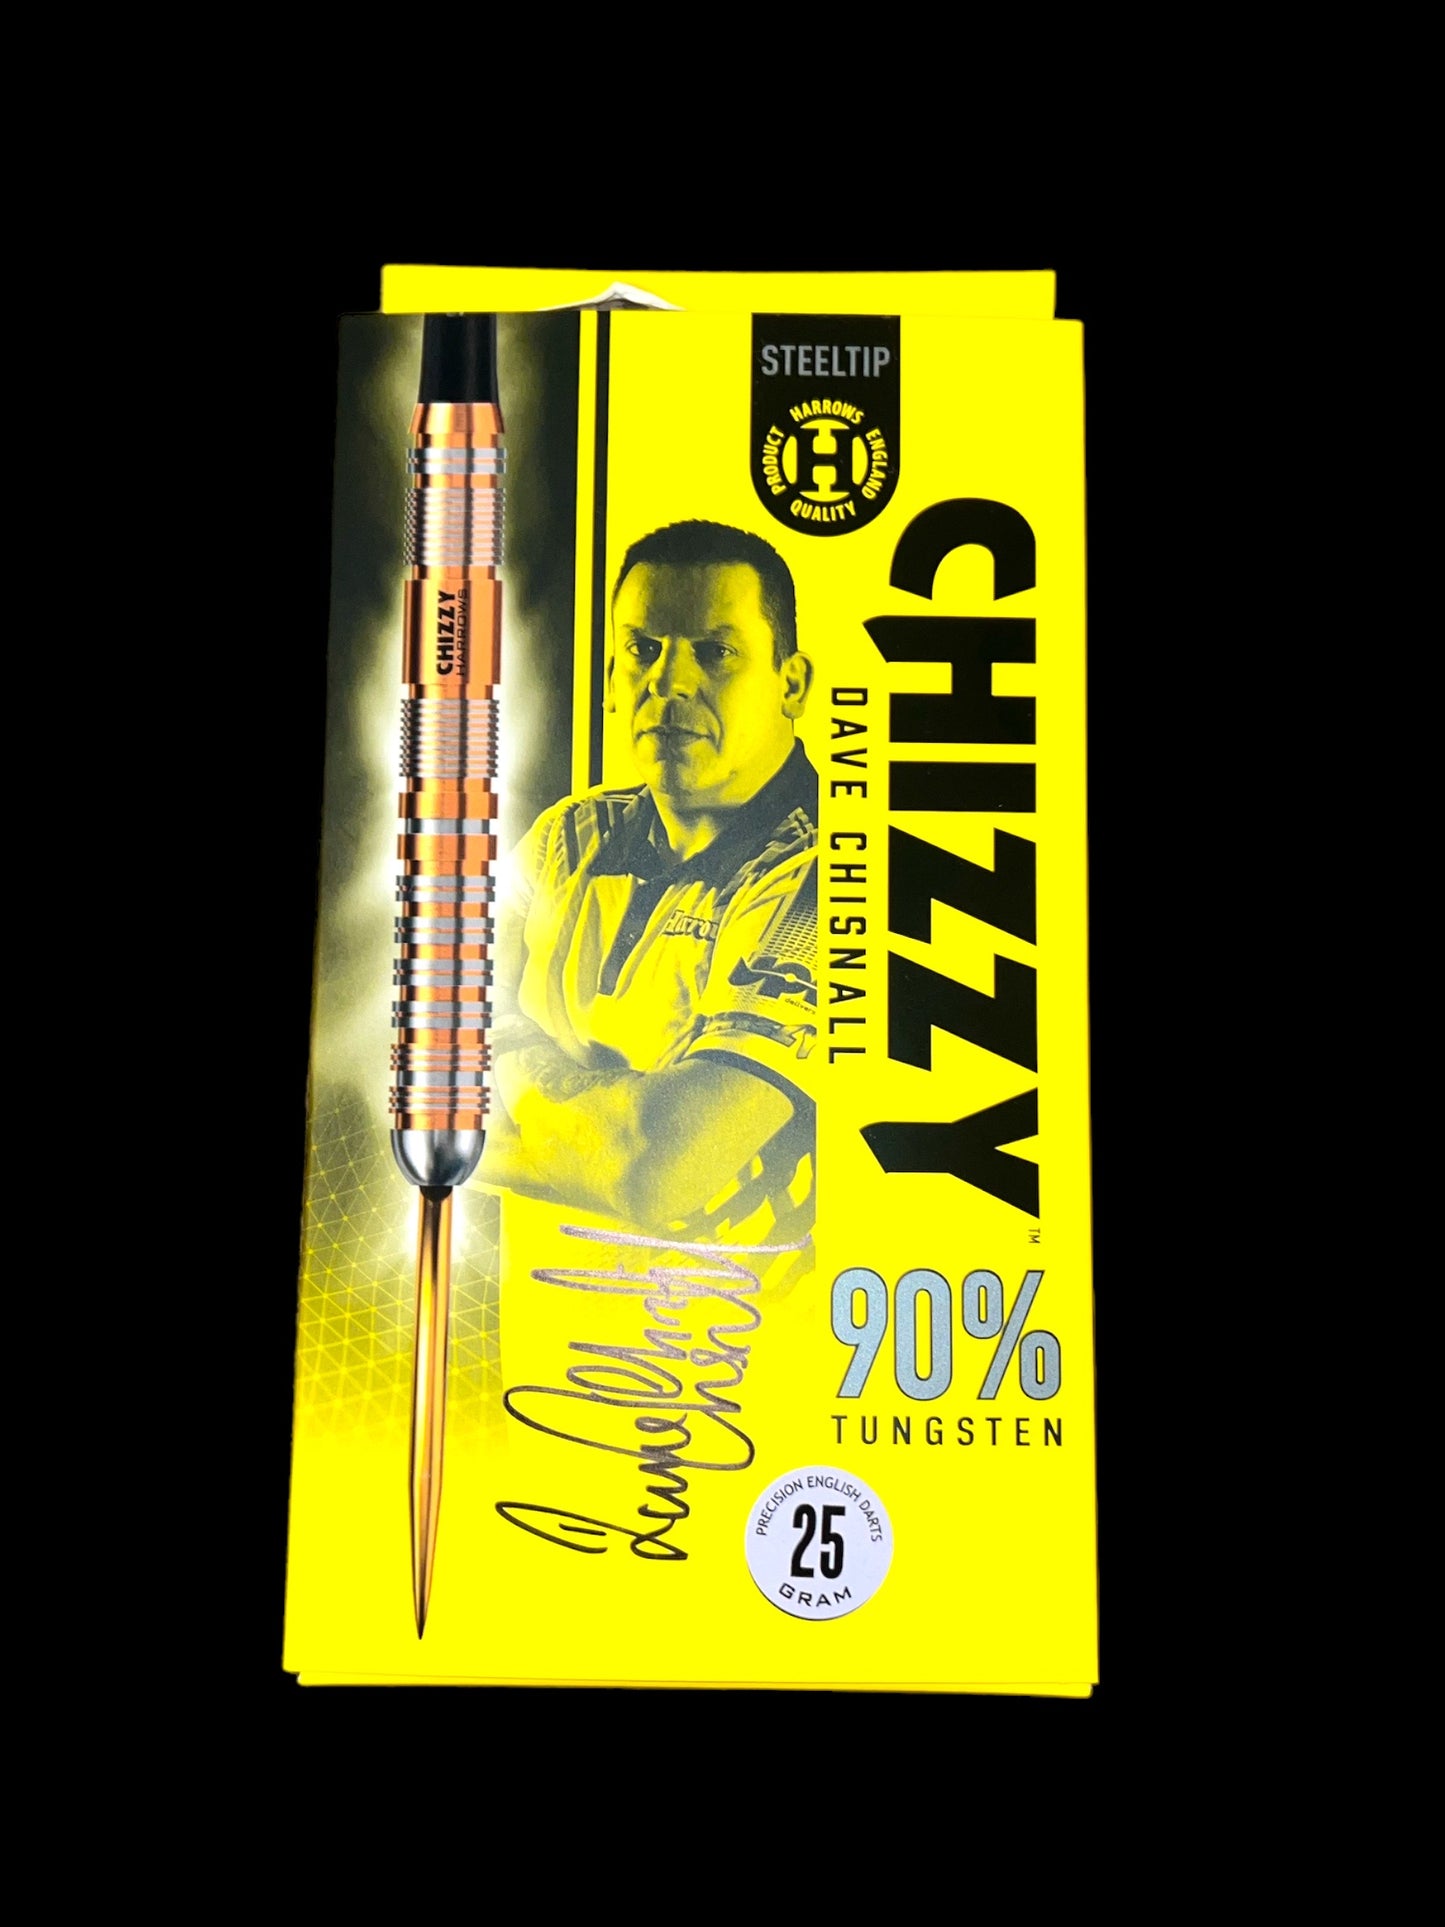 Dave Chisnall ‘Chizzy’ signed Target Darts 25 gram